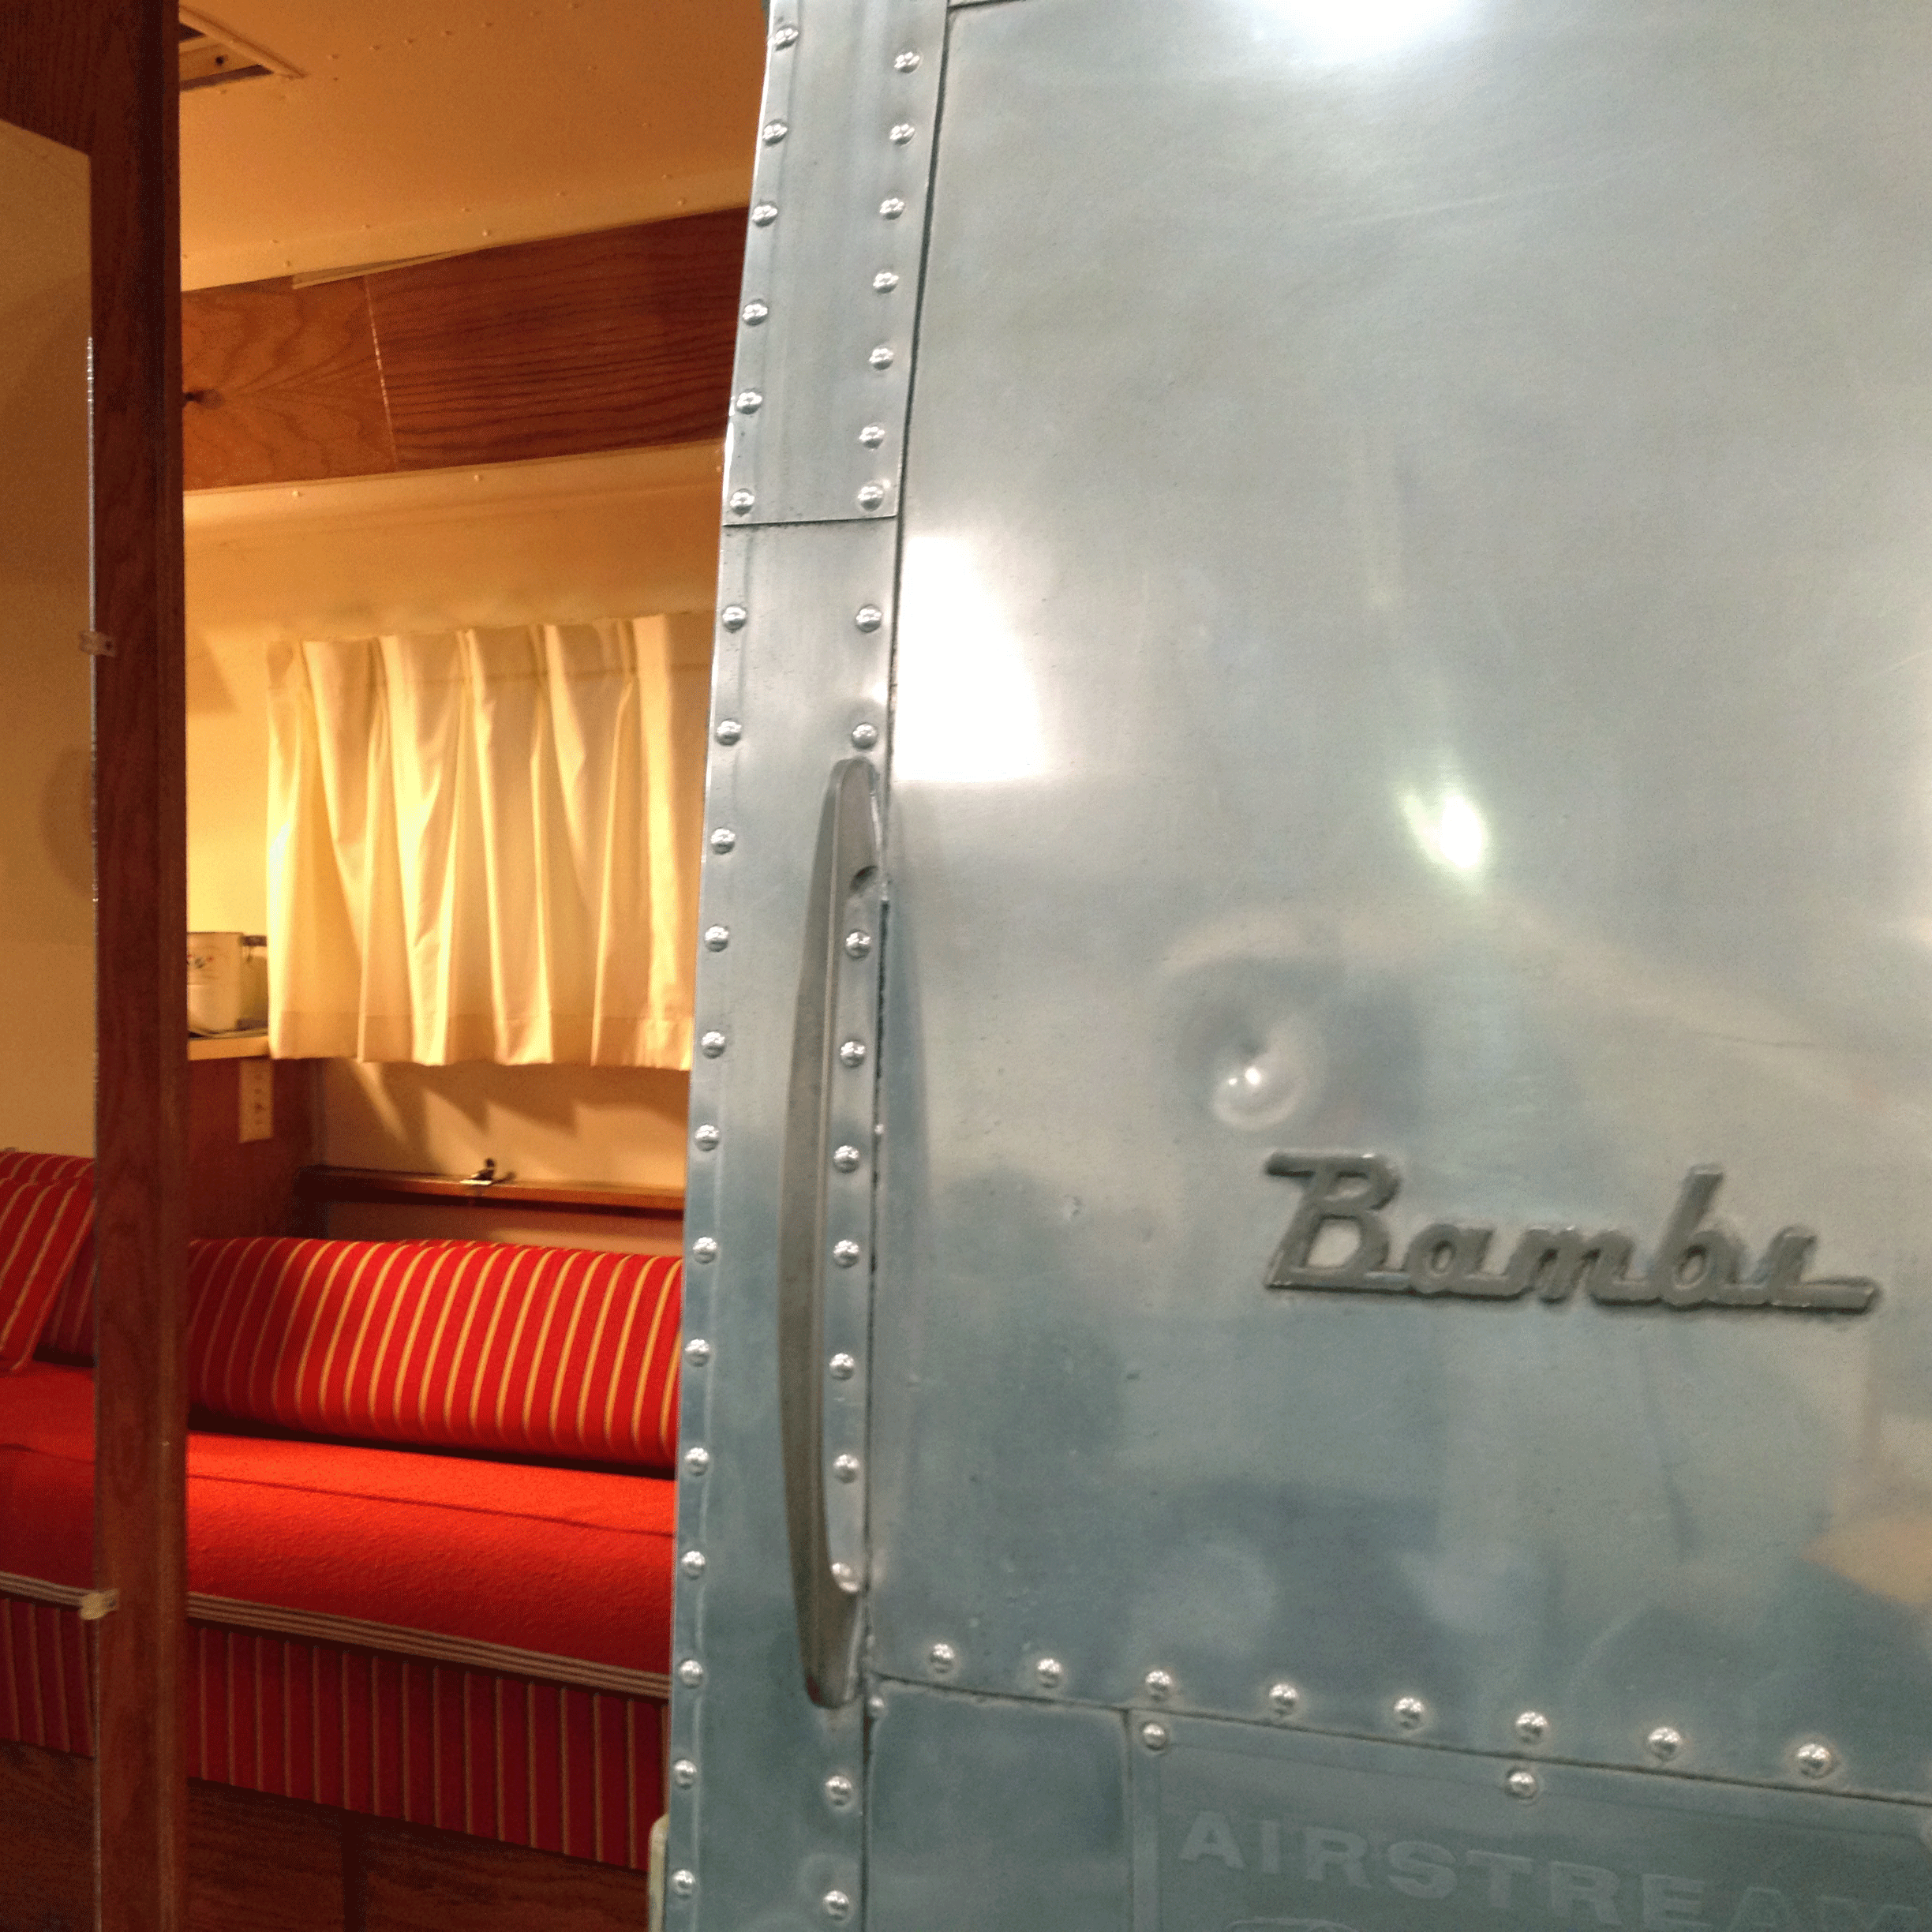 1962 Airstream named Bambi looks about as sweet as a doe